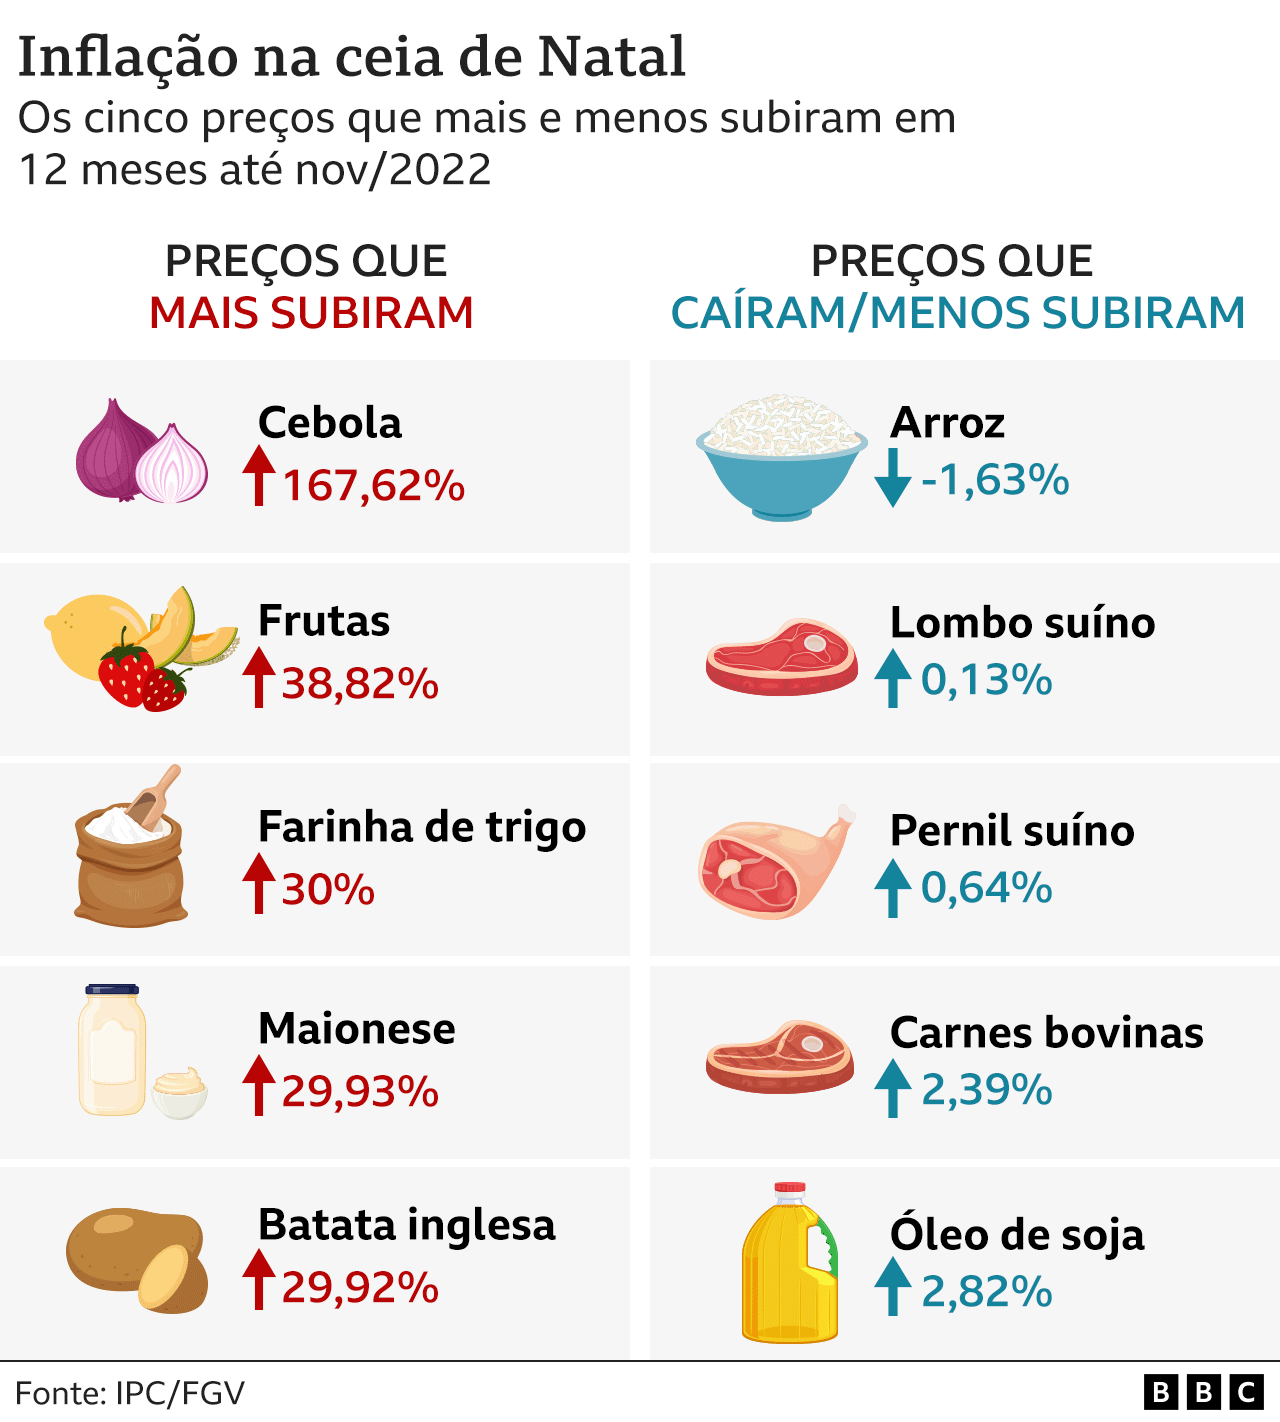 infographic shows the products that had the highest price increase (Onion, Fruits, Wheat flour, Mayonnaise, Potatoes) and the lowest (Rice, Pork loin, Pork shank, Beef, Soybean oil)